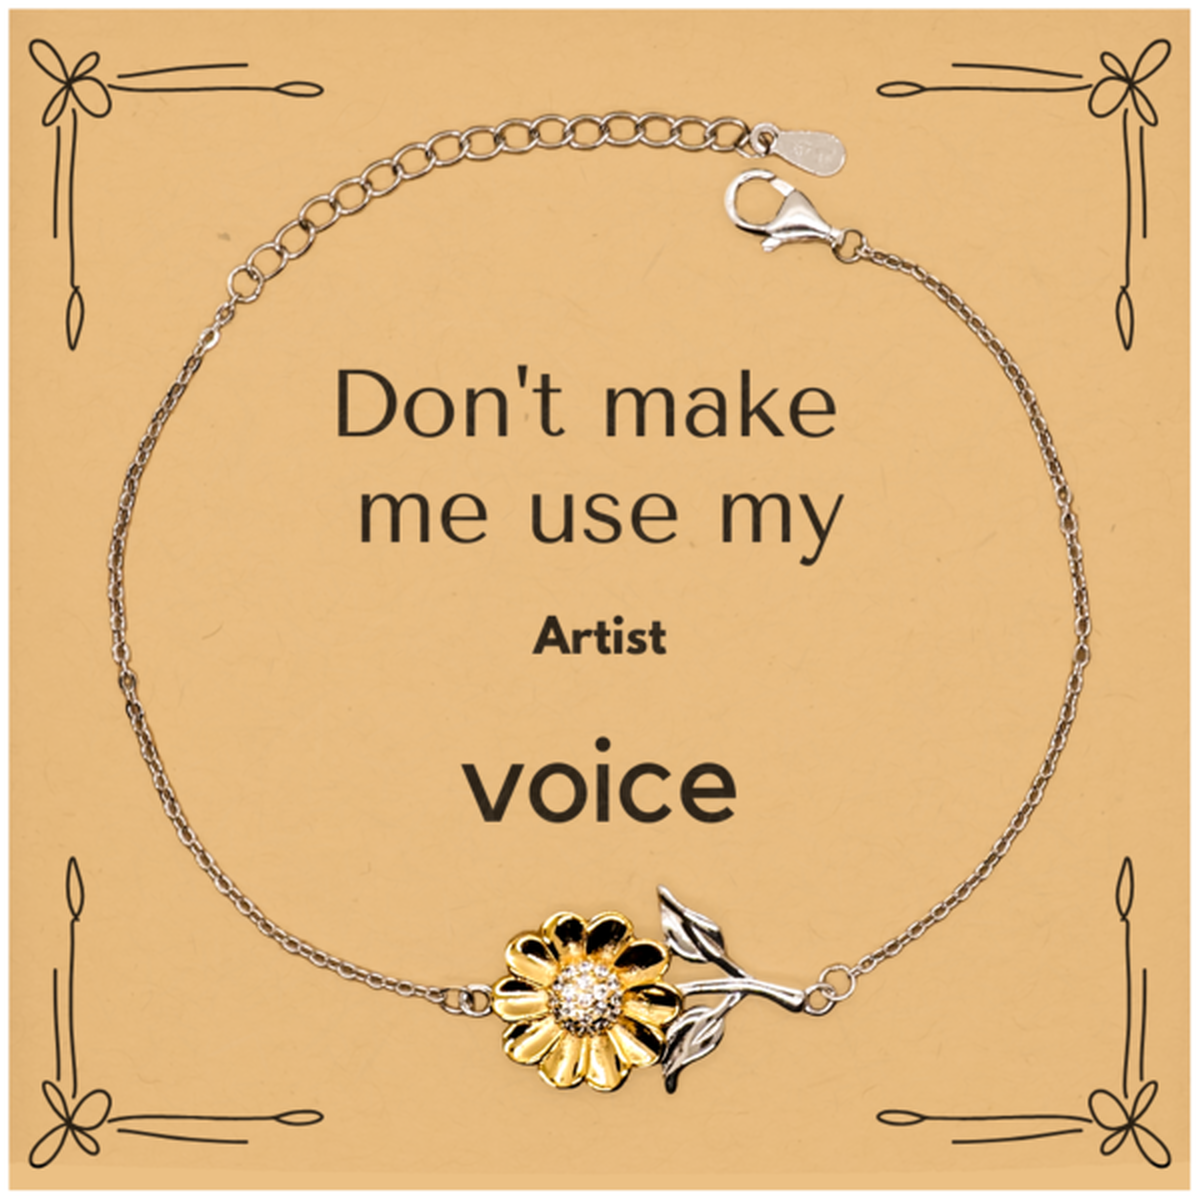 Don't make me use my Artist voice, Sarcasm Artist Card Gifts, Christmas Artist Sunflower Bracelet Birthday Unique Gifts For Artist Coworkers, Men, Women, Colleague, Friends